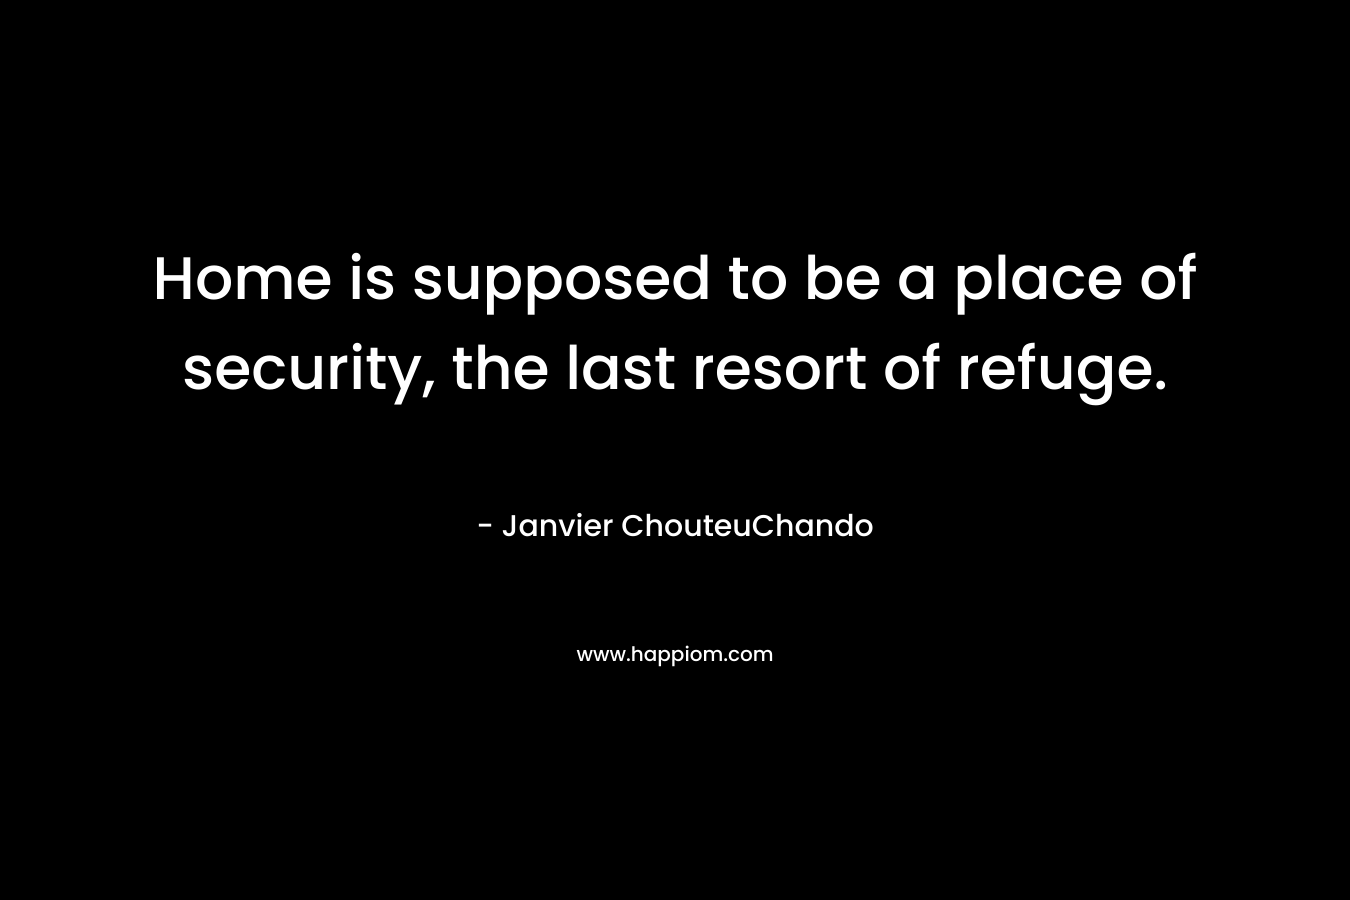 Home is supposed to be a place of security, the last resort of refuge.